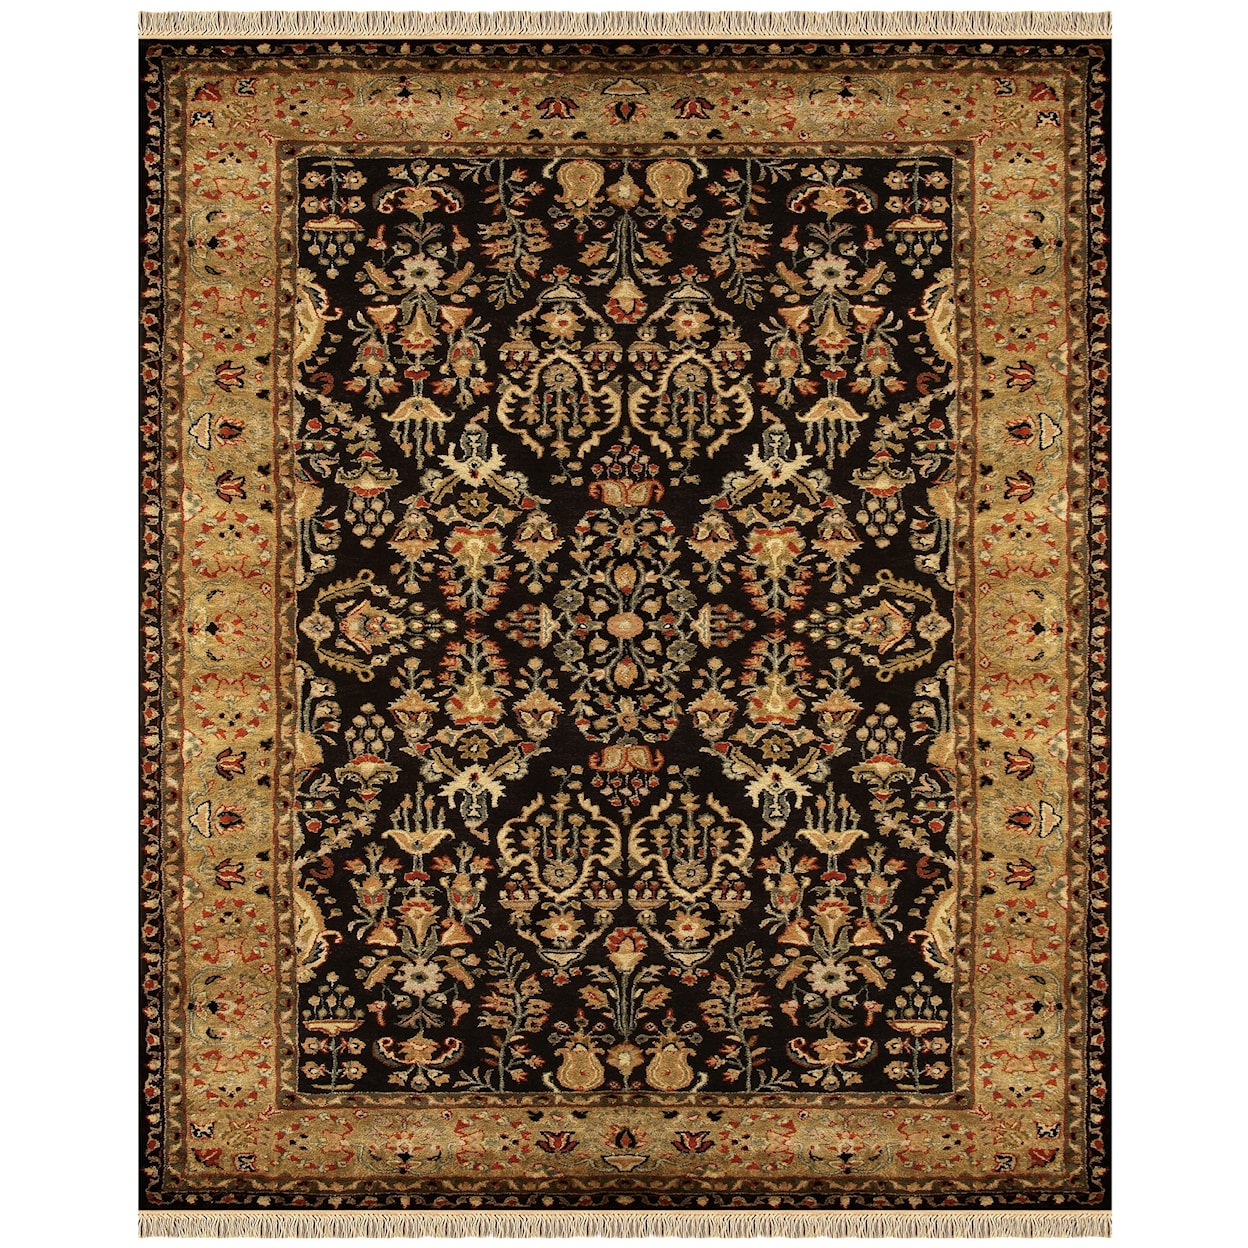 Feizy Rugs Amore Black/Gold 5' x 8' Area Rug